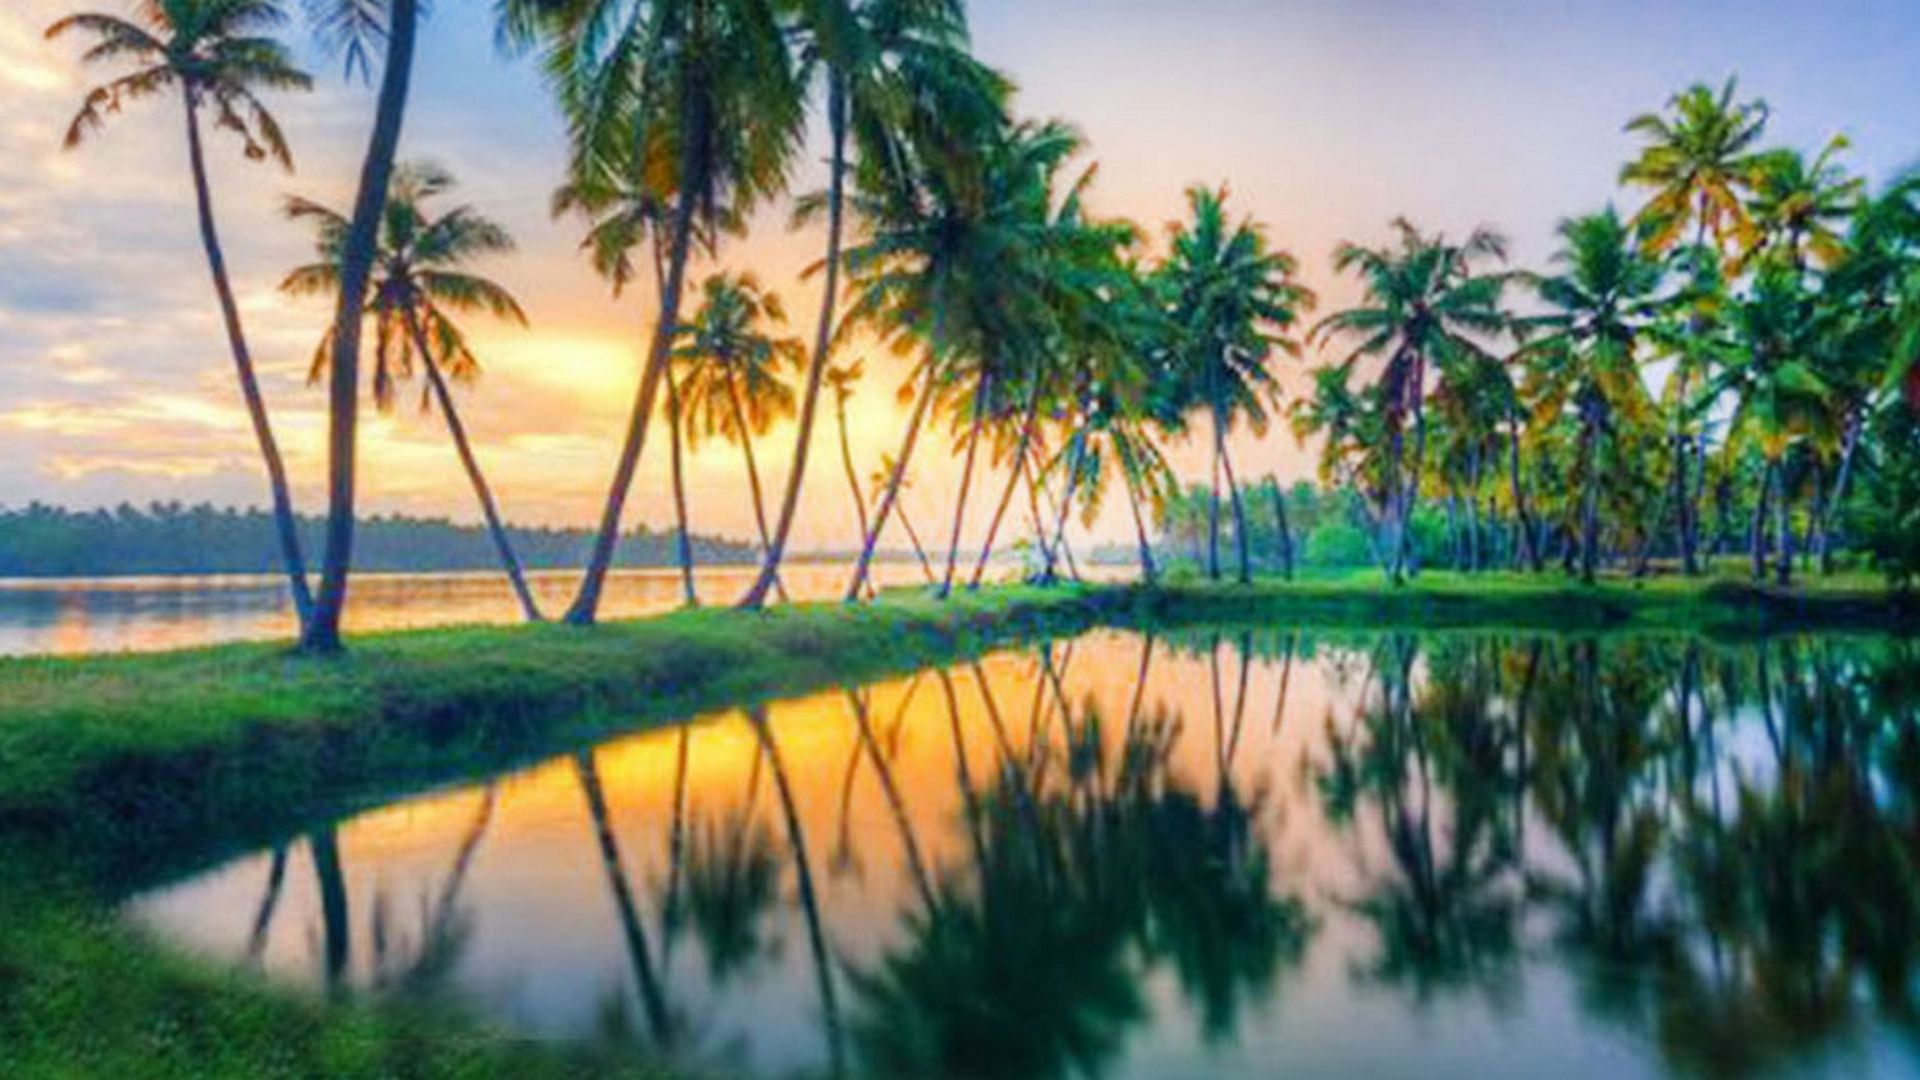 Discover Kerala's Charm: Exclusive Tour Packages for Couples & Families, Priced from ₹18,075